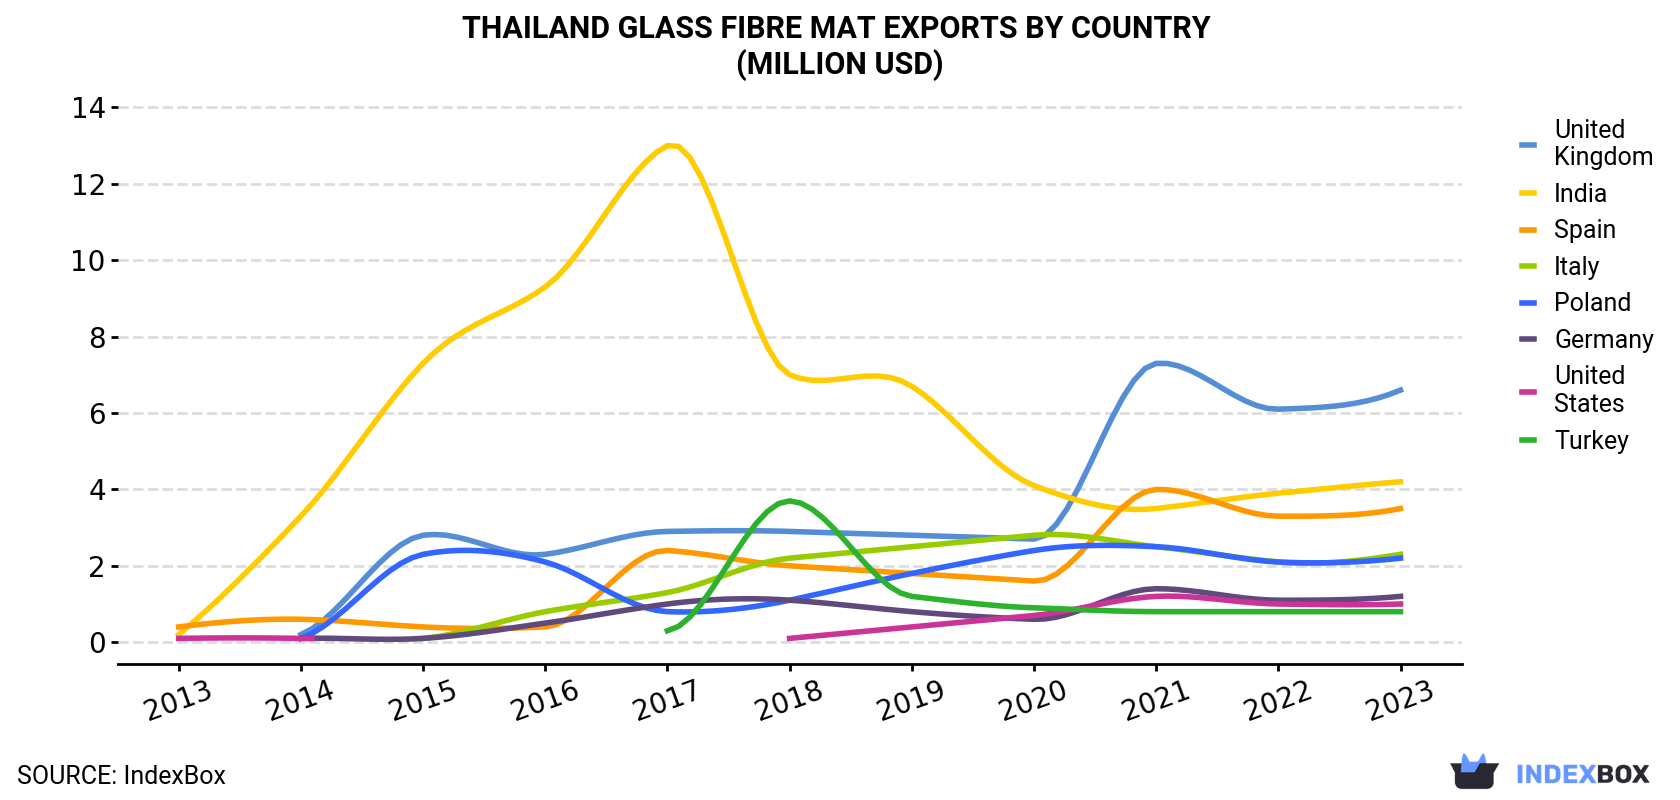 Thailand Glass Fibre Mat Exports By Country (Million USD)